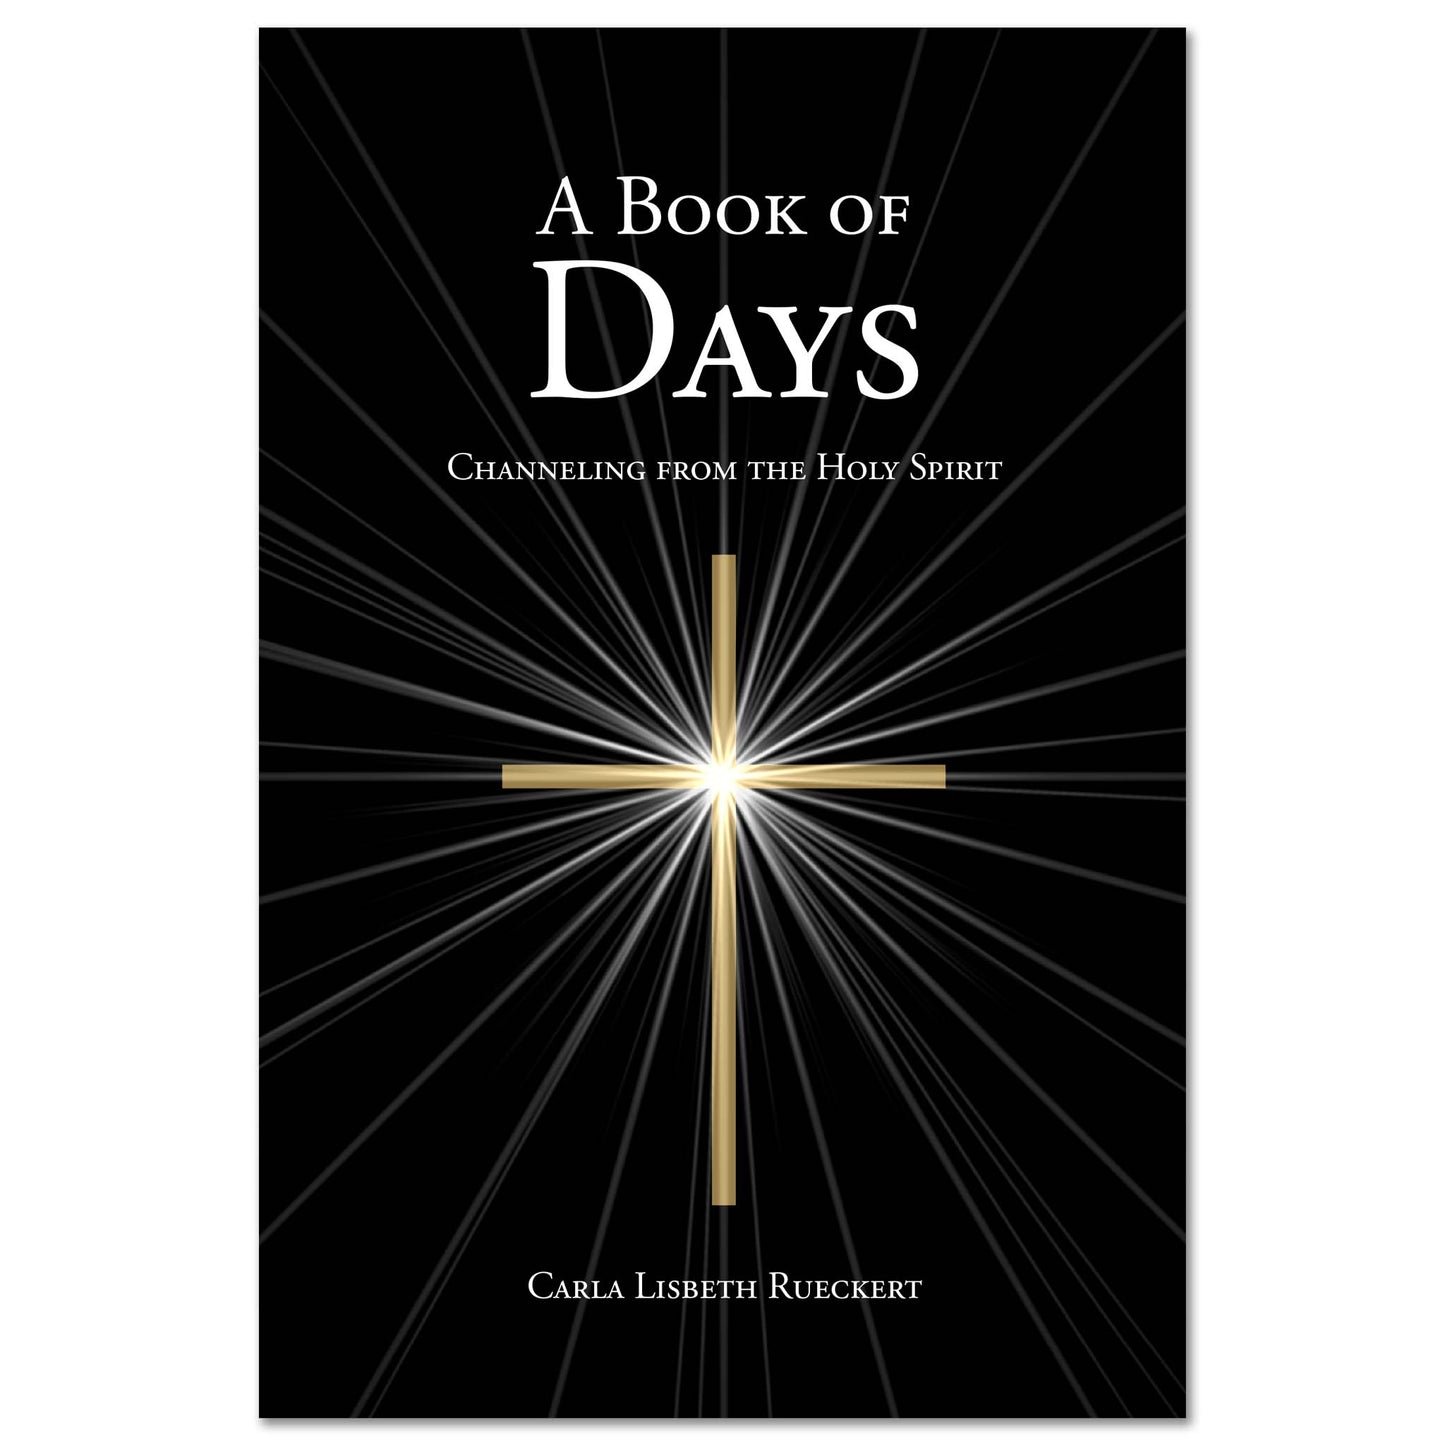 A Book of Days - Channeling from the Holy Spirit